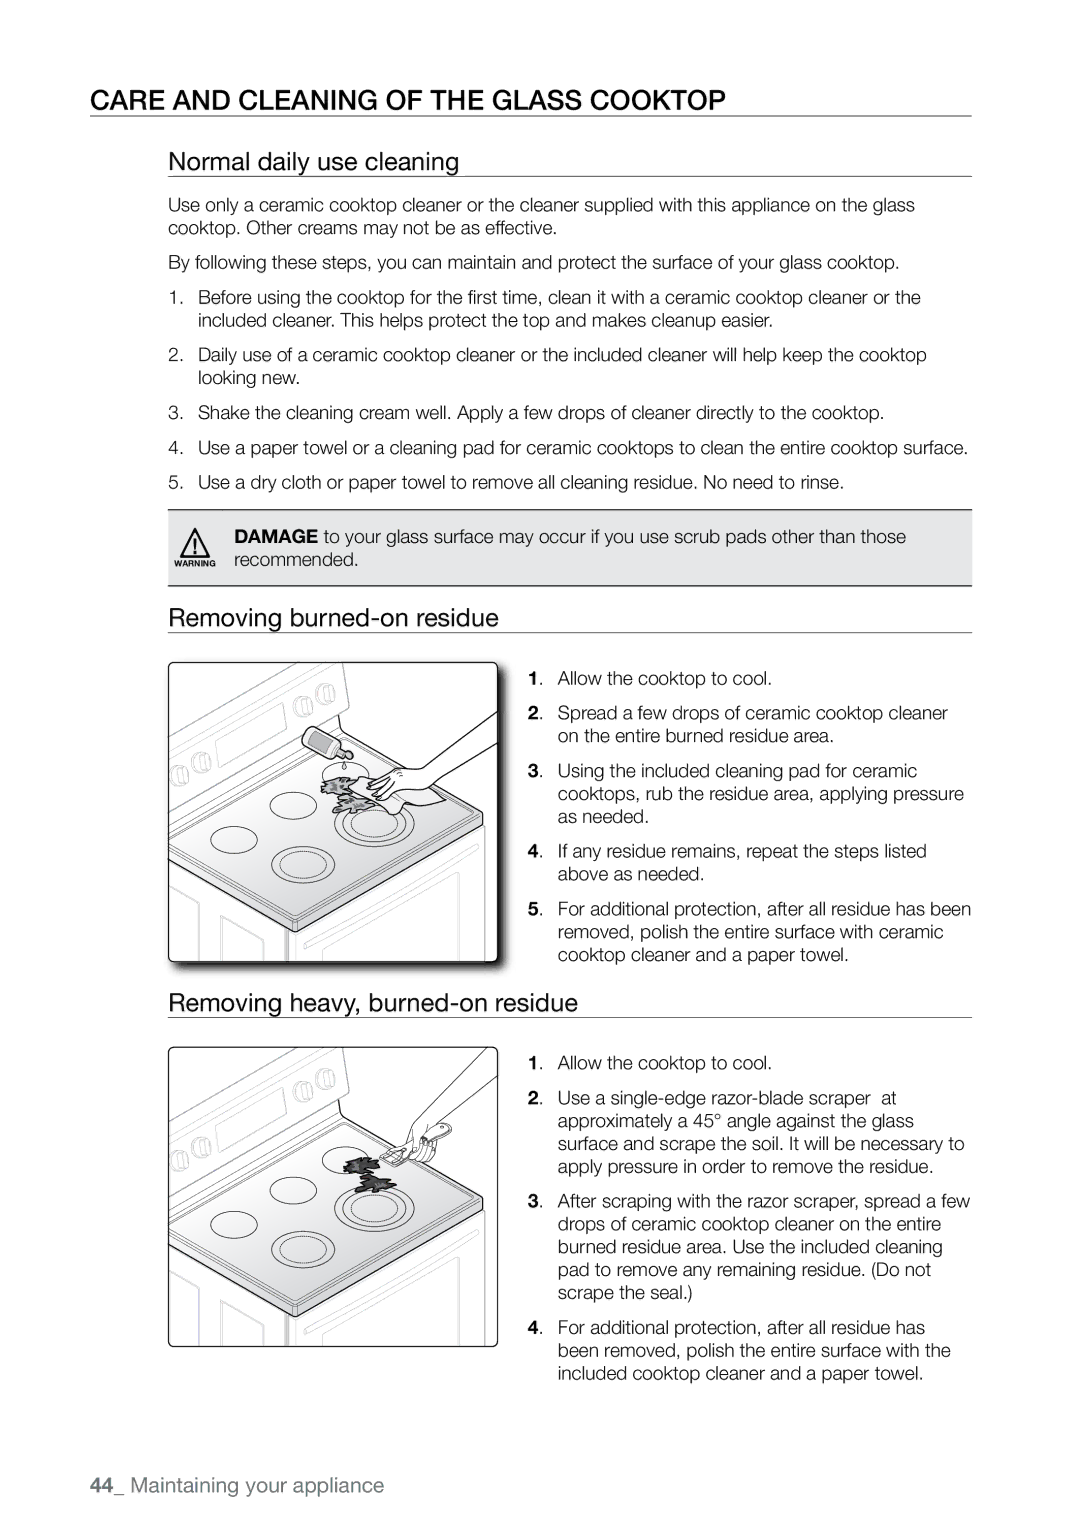 Samsung FTQ387 user manual Care and cleaning of the glass cooktop, Normal daily use cleaning, Removing burned-on residue 